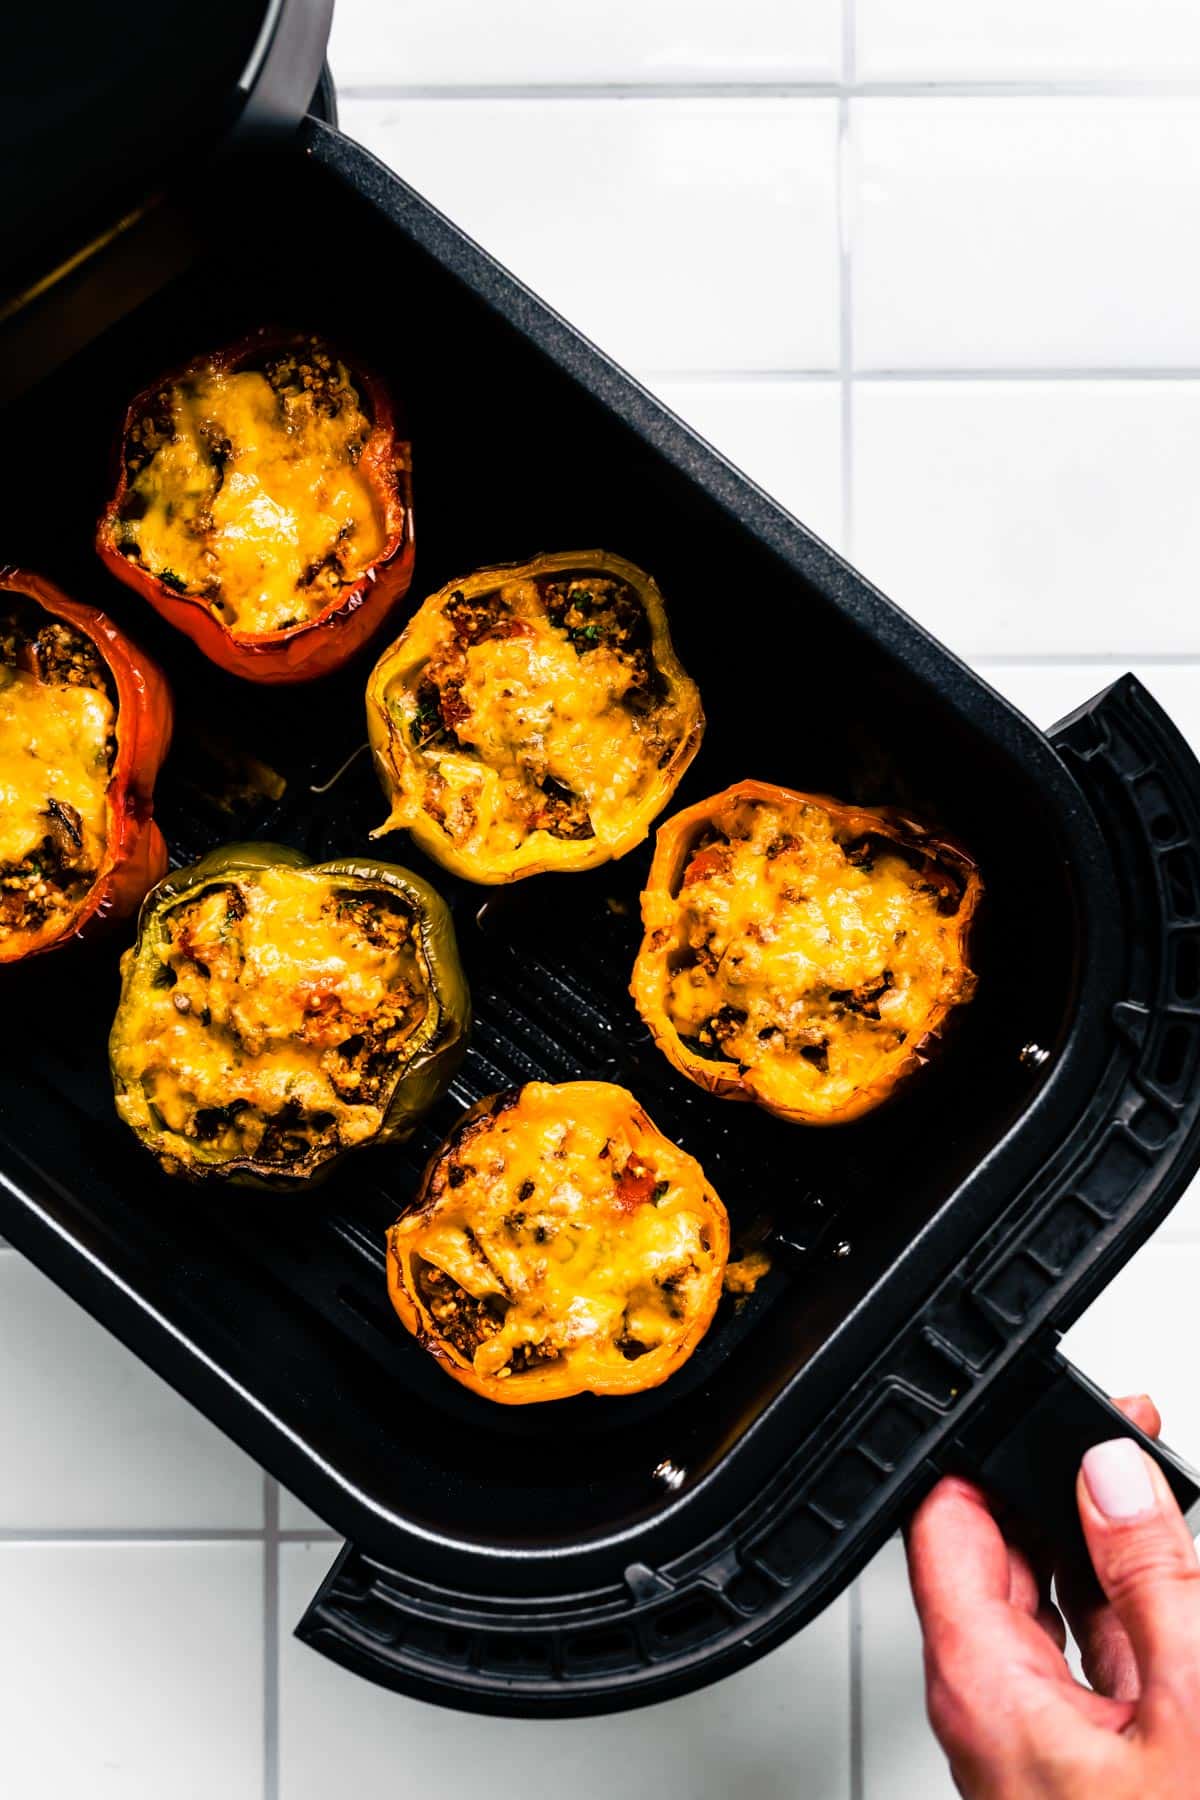 Six vegetarian stuffed bell peppers topped with melted cheese in an air fryer basket.